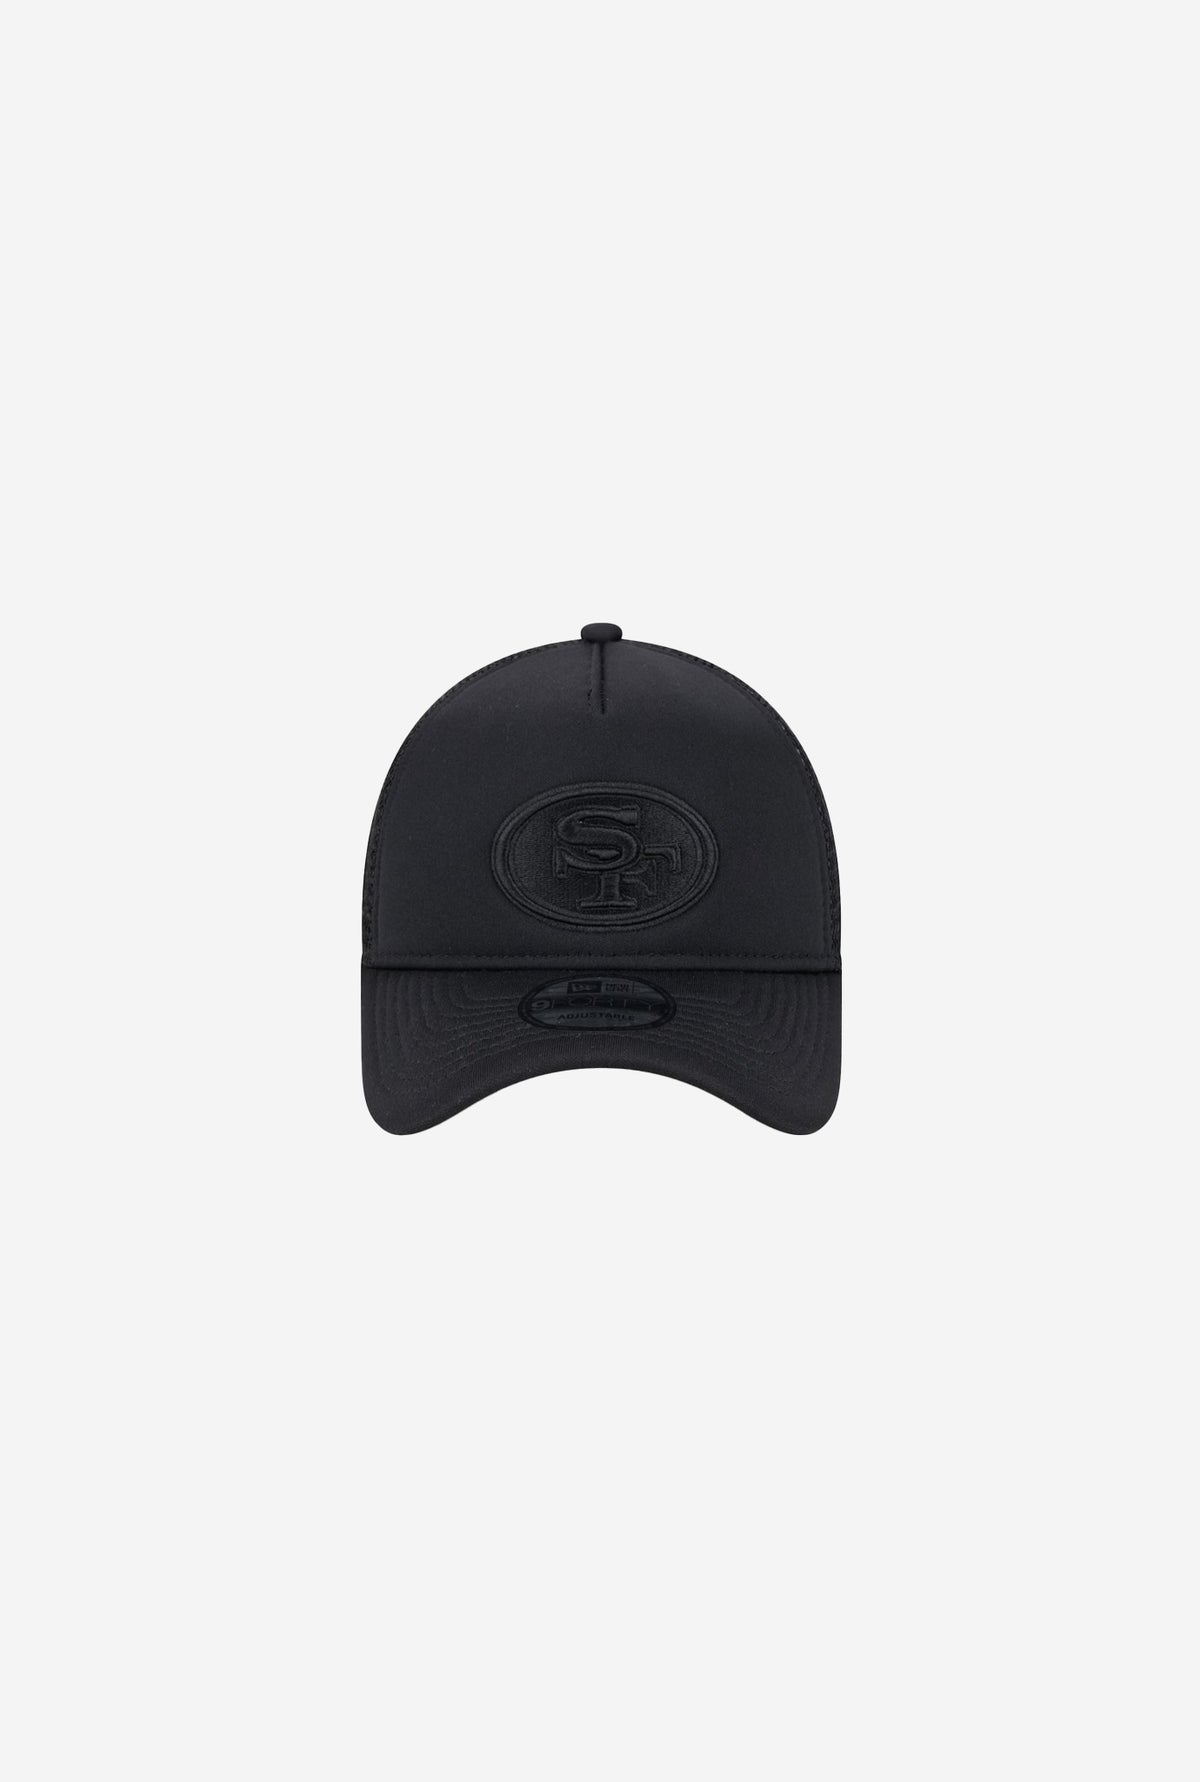 San Francisco 49ers 9FORTY A-Frame All Day Trucker - Black/Black